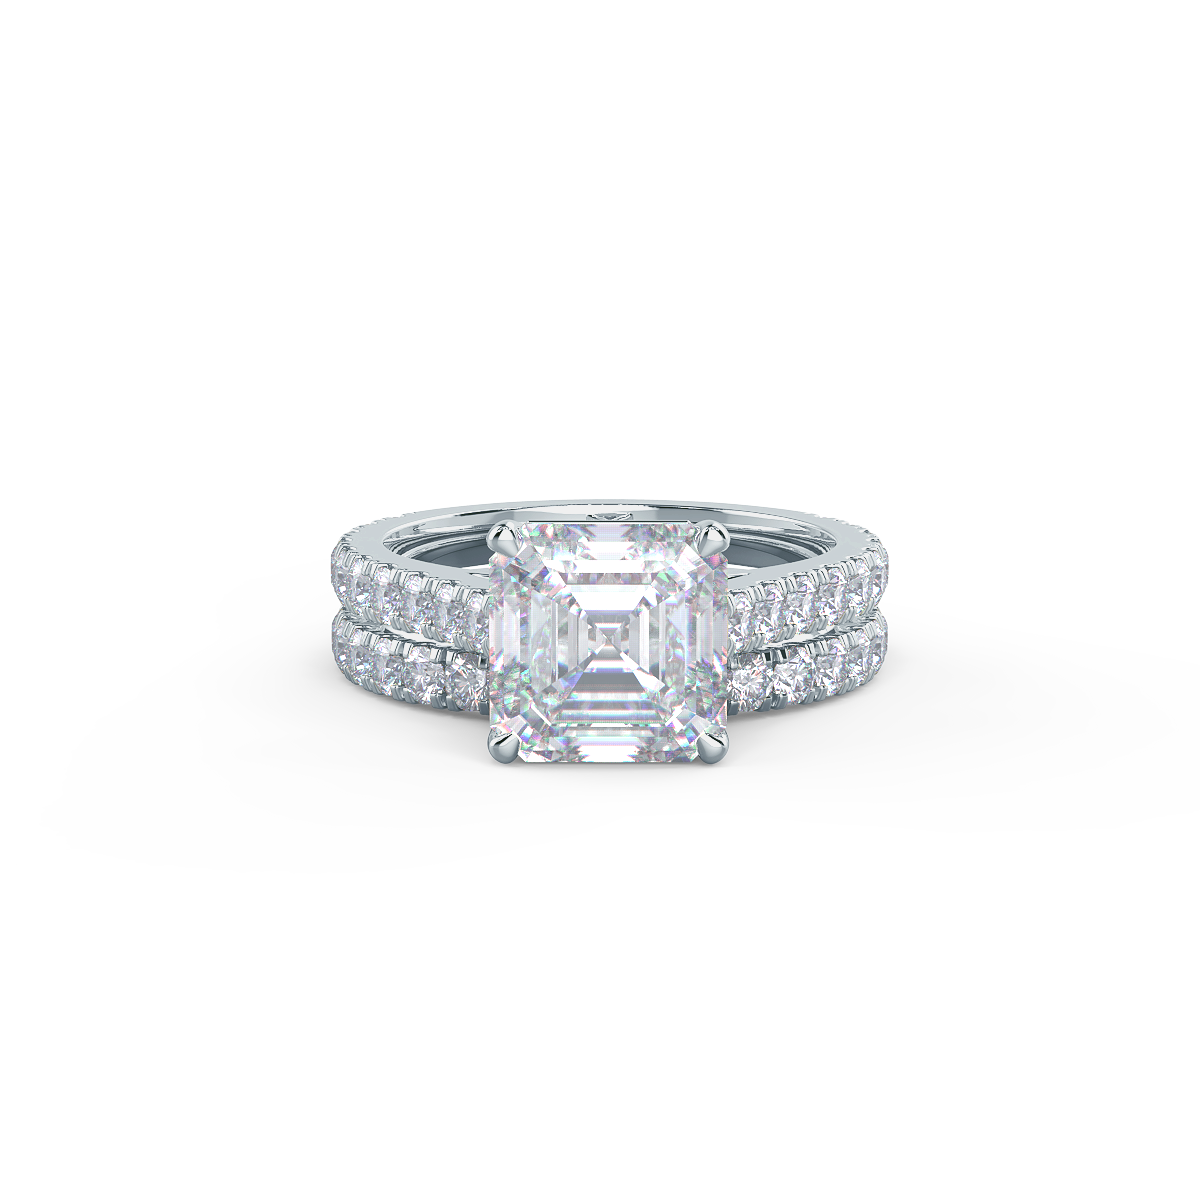  This setting allows a wedding band to sit flush without a gap.    Shop All Wedding Bands   